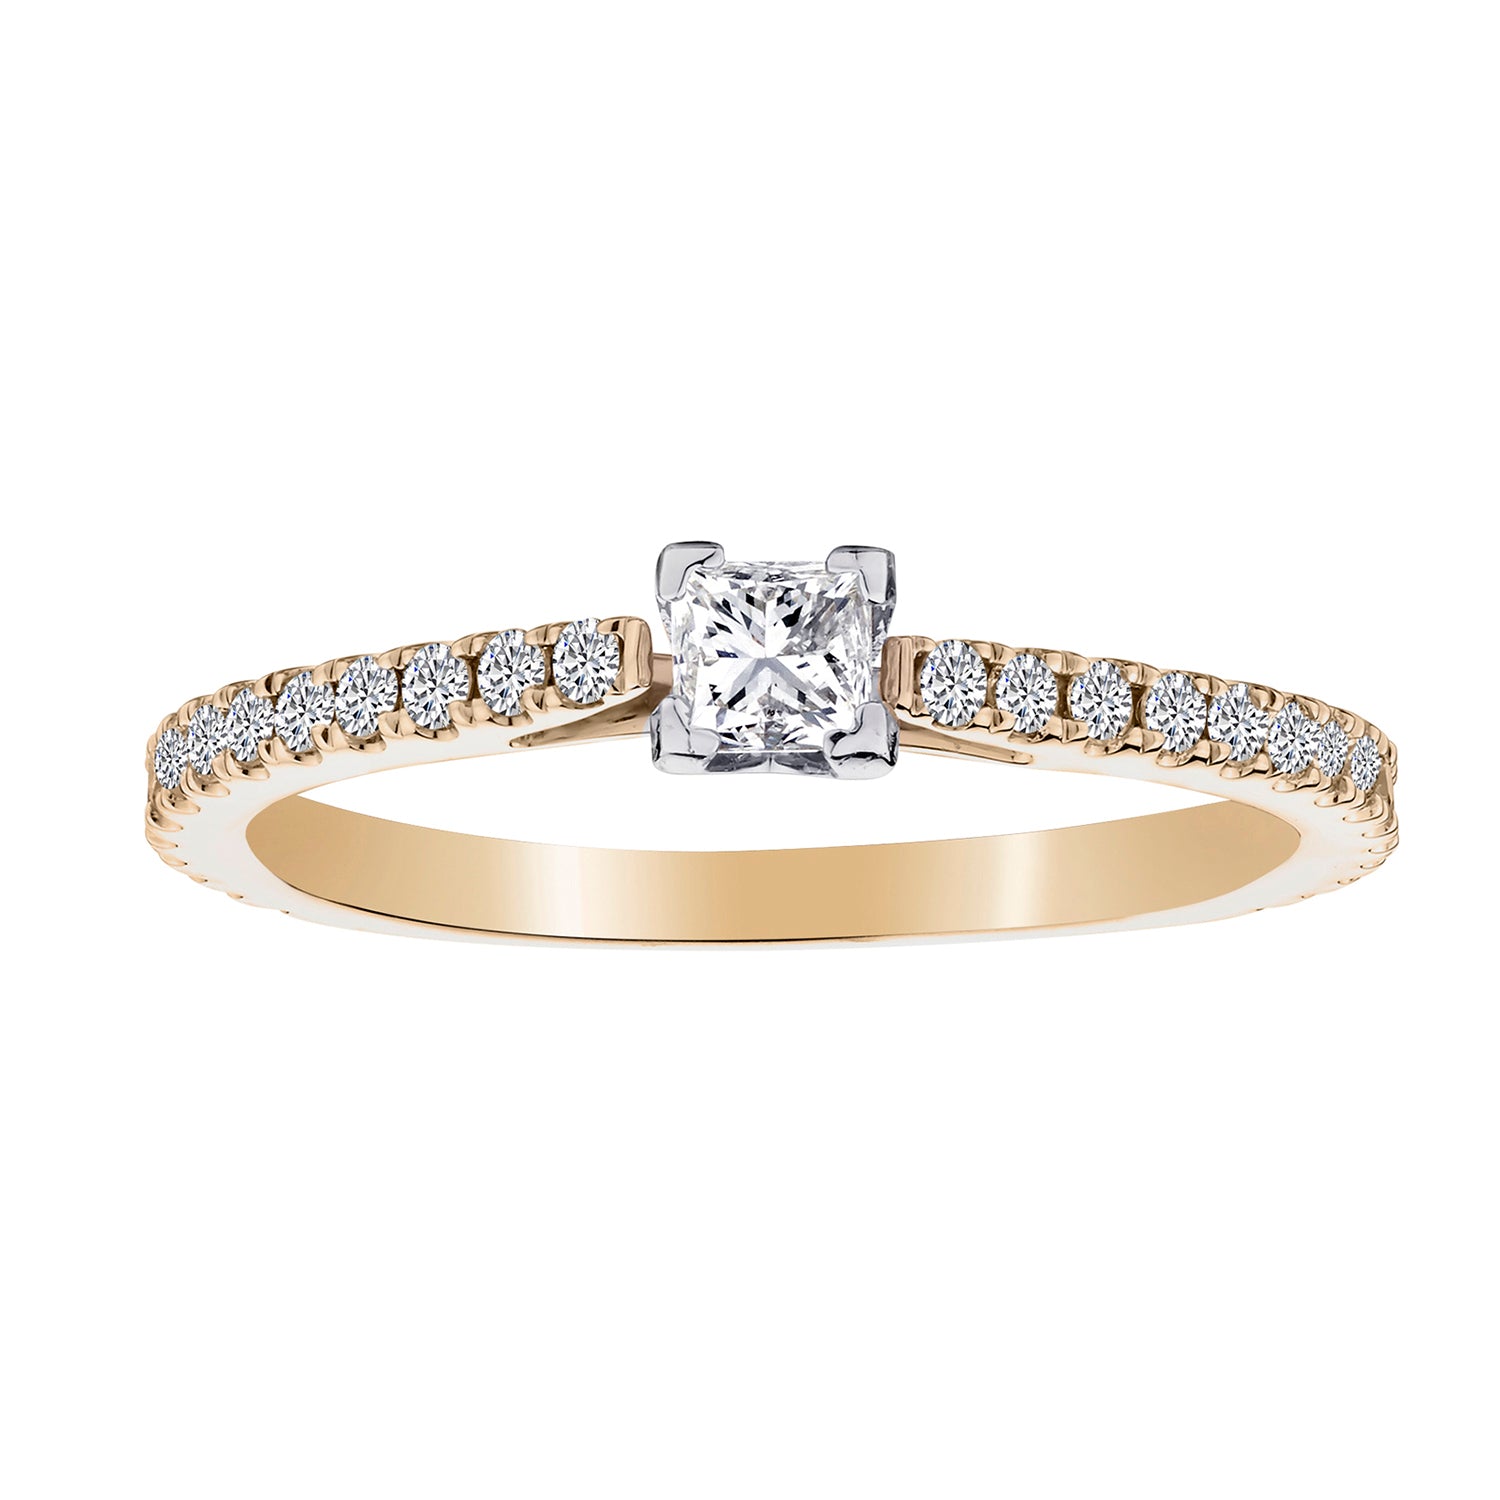 .50 Carat Canadian Diamond Engagement Ring,  Centre Princes I1,  14kt Yellow Gold. Griffin Jewellery Designs